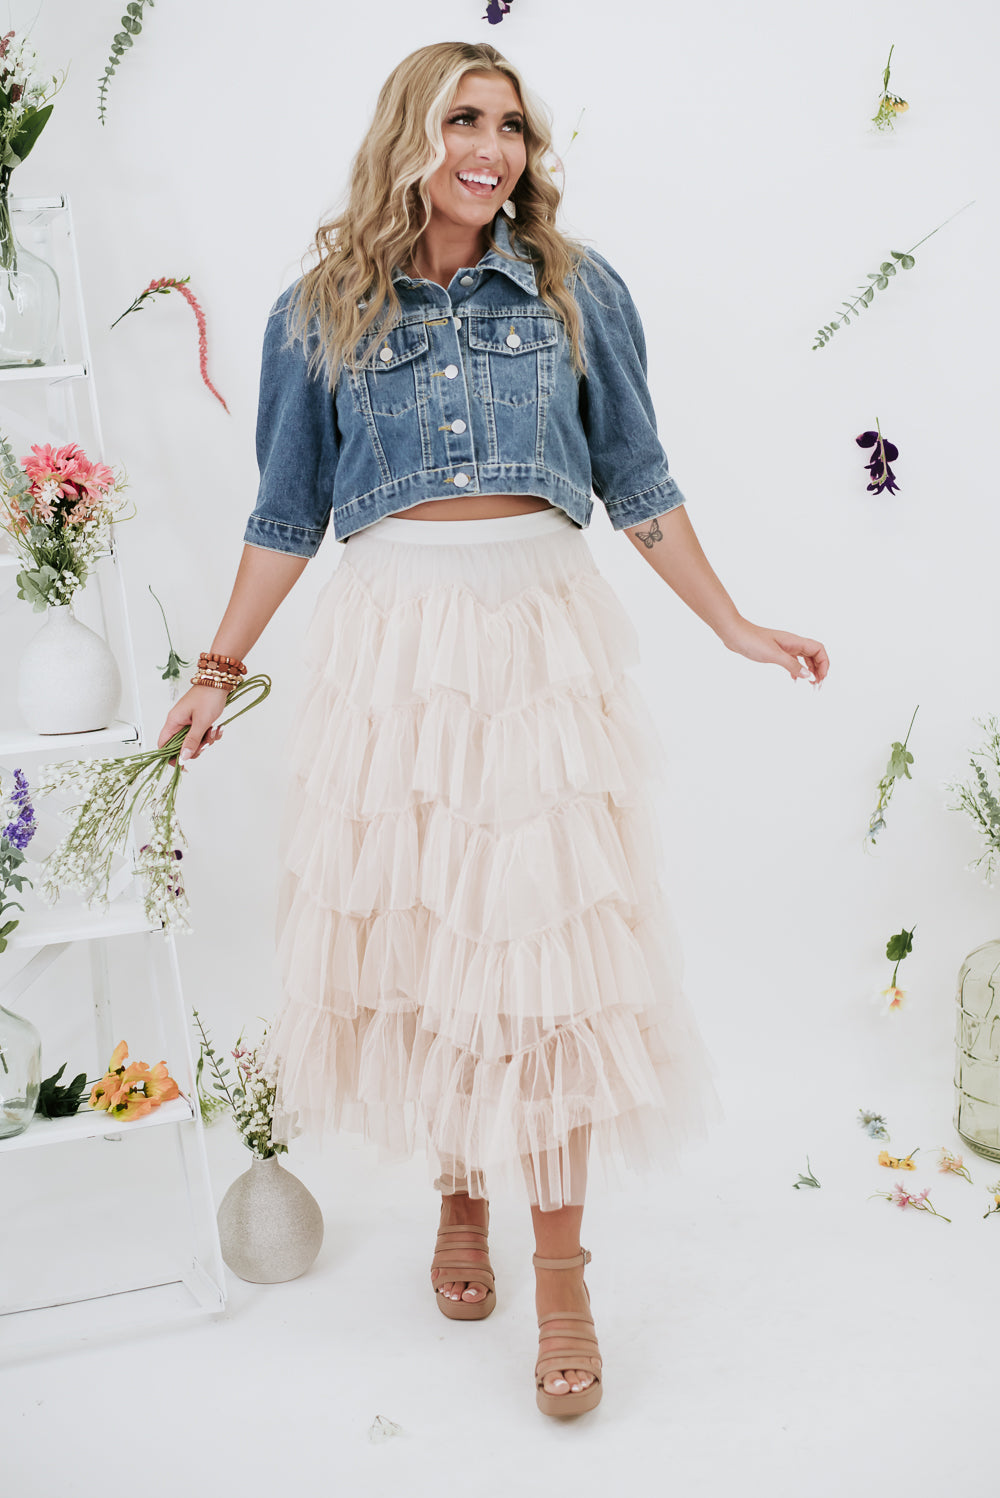 Chicwish - Swooning? We get it! This layered tulle skirt